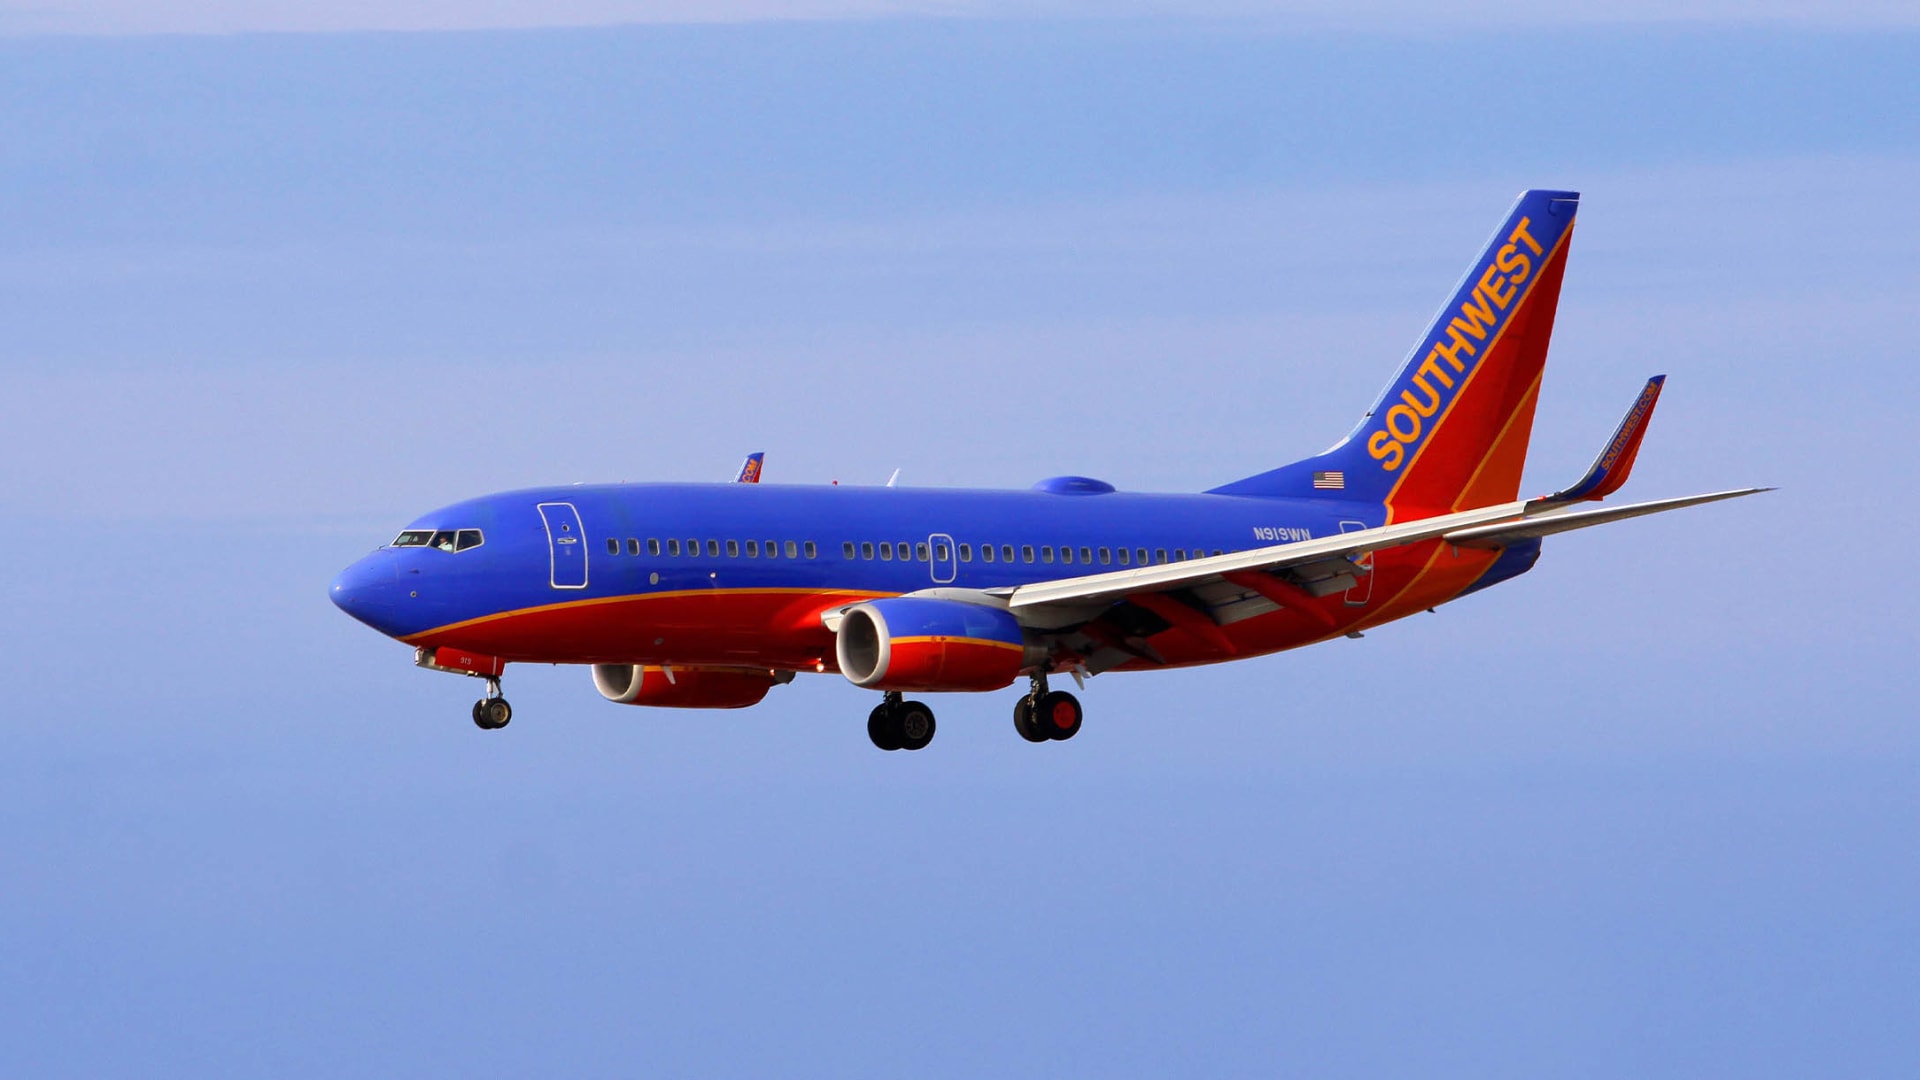 Southwest Airlines Just Made a Big Change. Its Pilots and Flight Attendants Should Be Very Happy